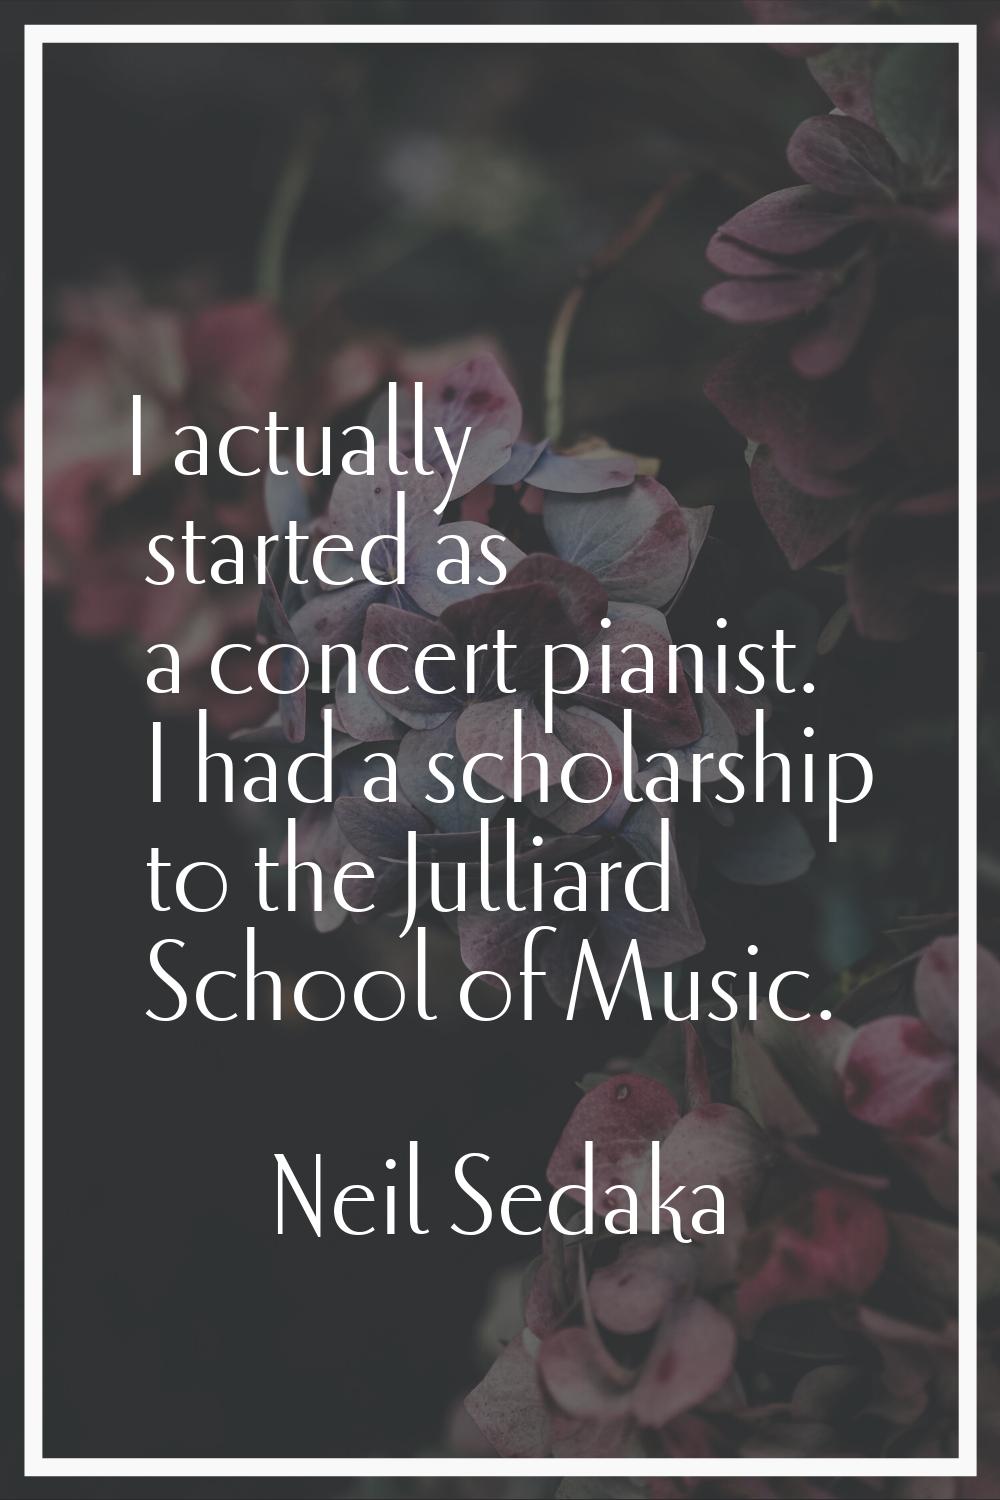 I actually started as a concert pianist. I had a scholarship to the Julliard School of Music.